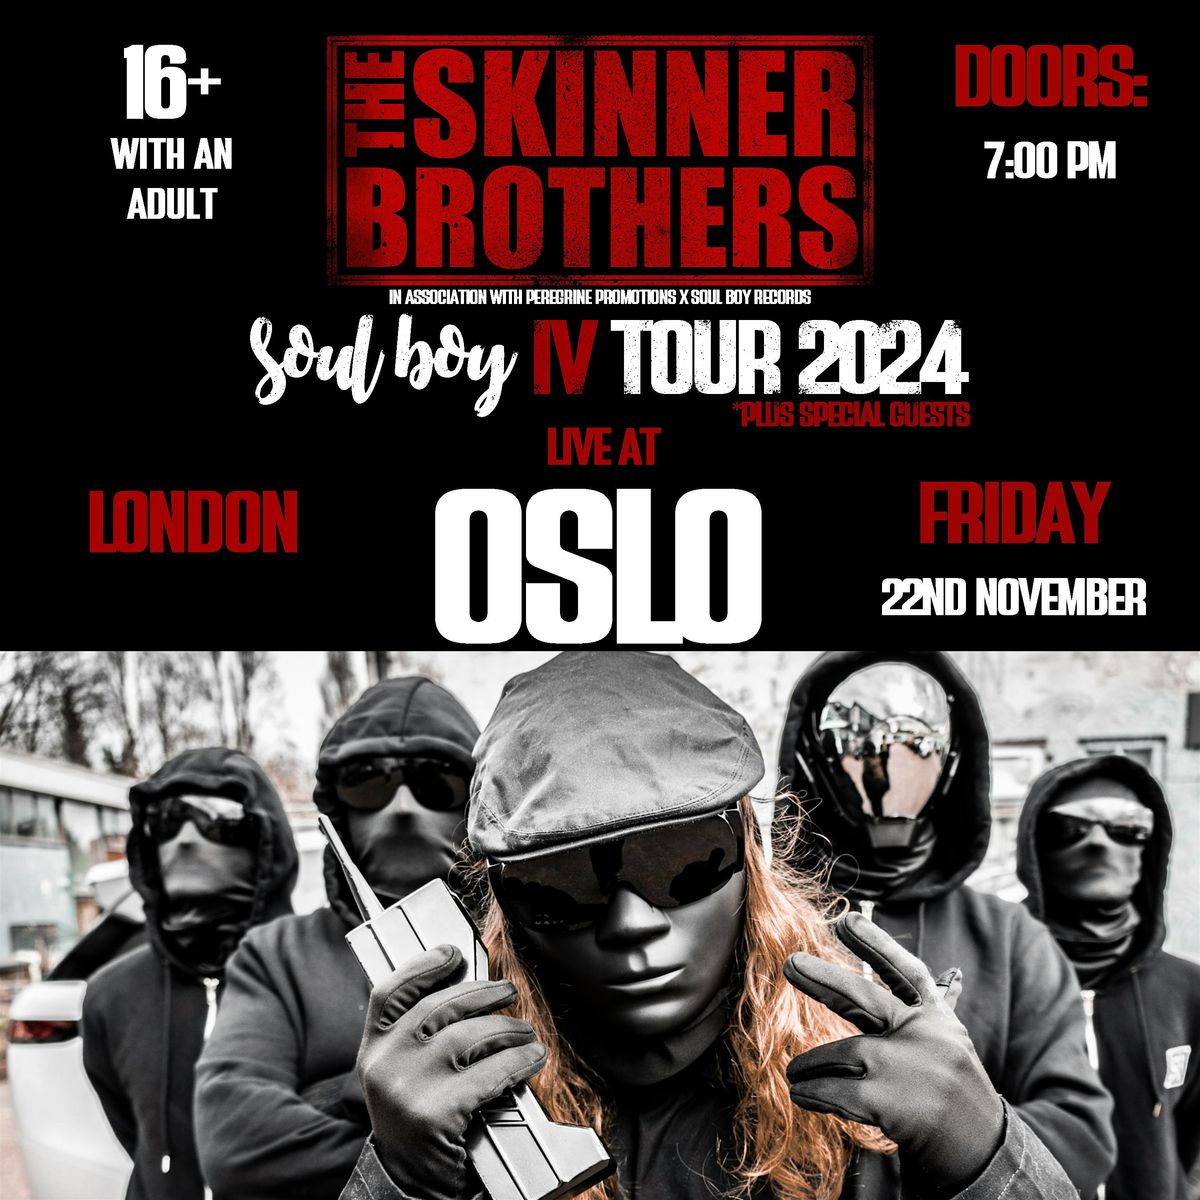 The Skinner Brothers live @ London OSLO